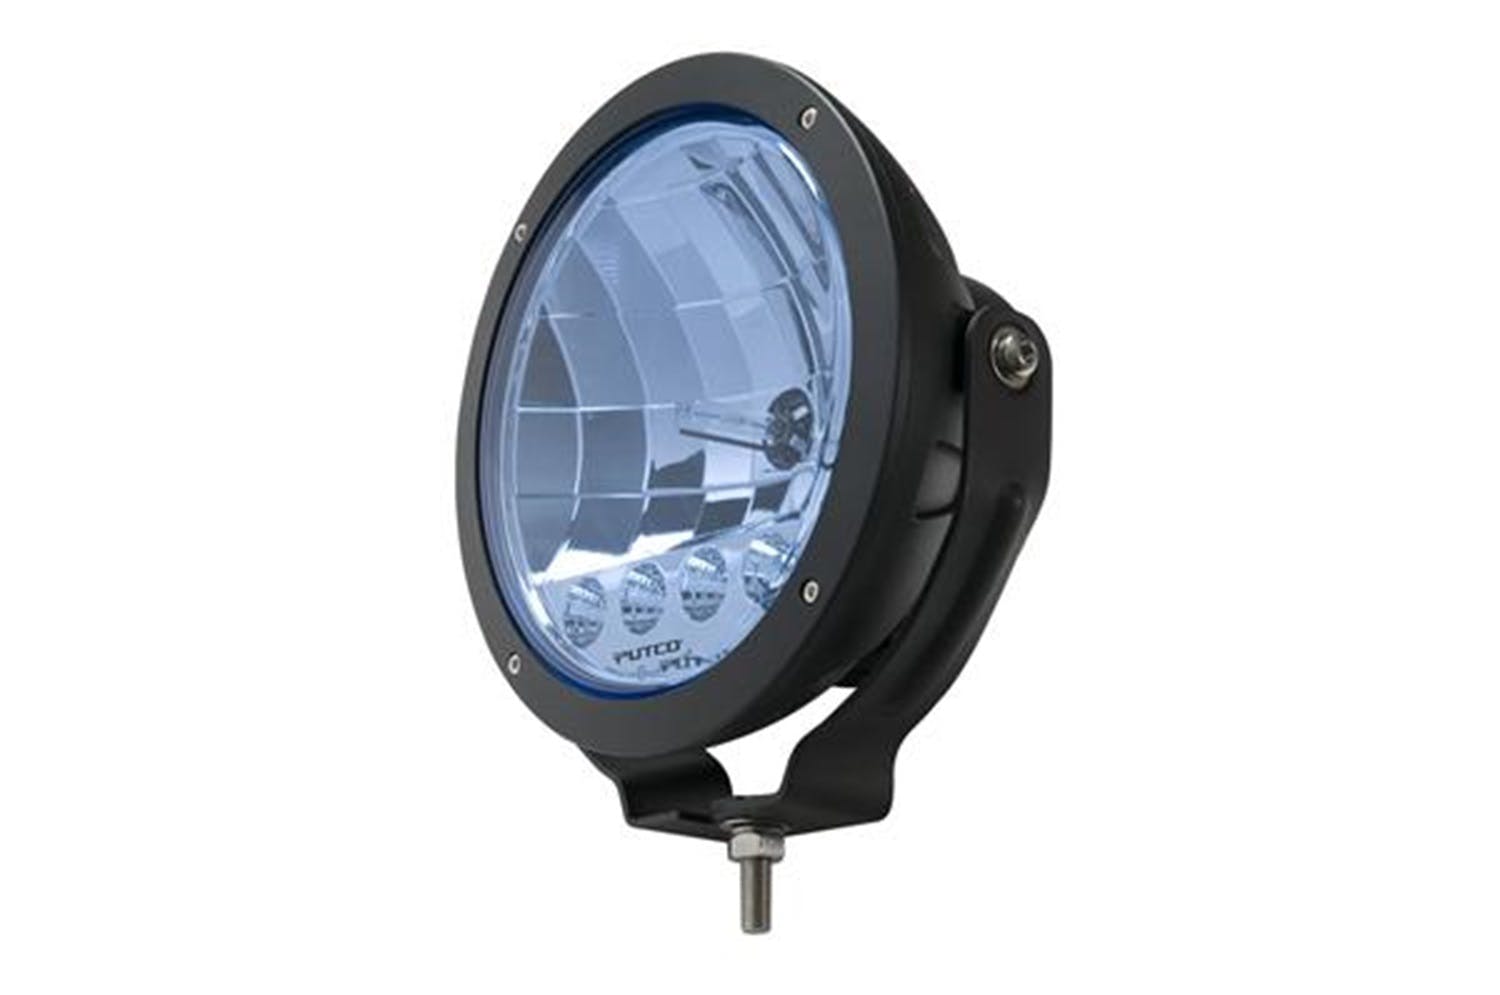 Putco 231930 HID Lamp w/4 LED Daytime Running Lights - 9 inch Black Housing with Blue Tinted Lens